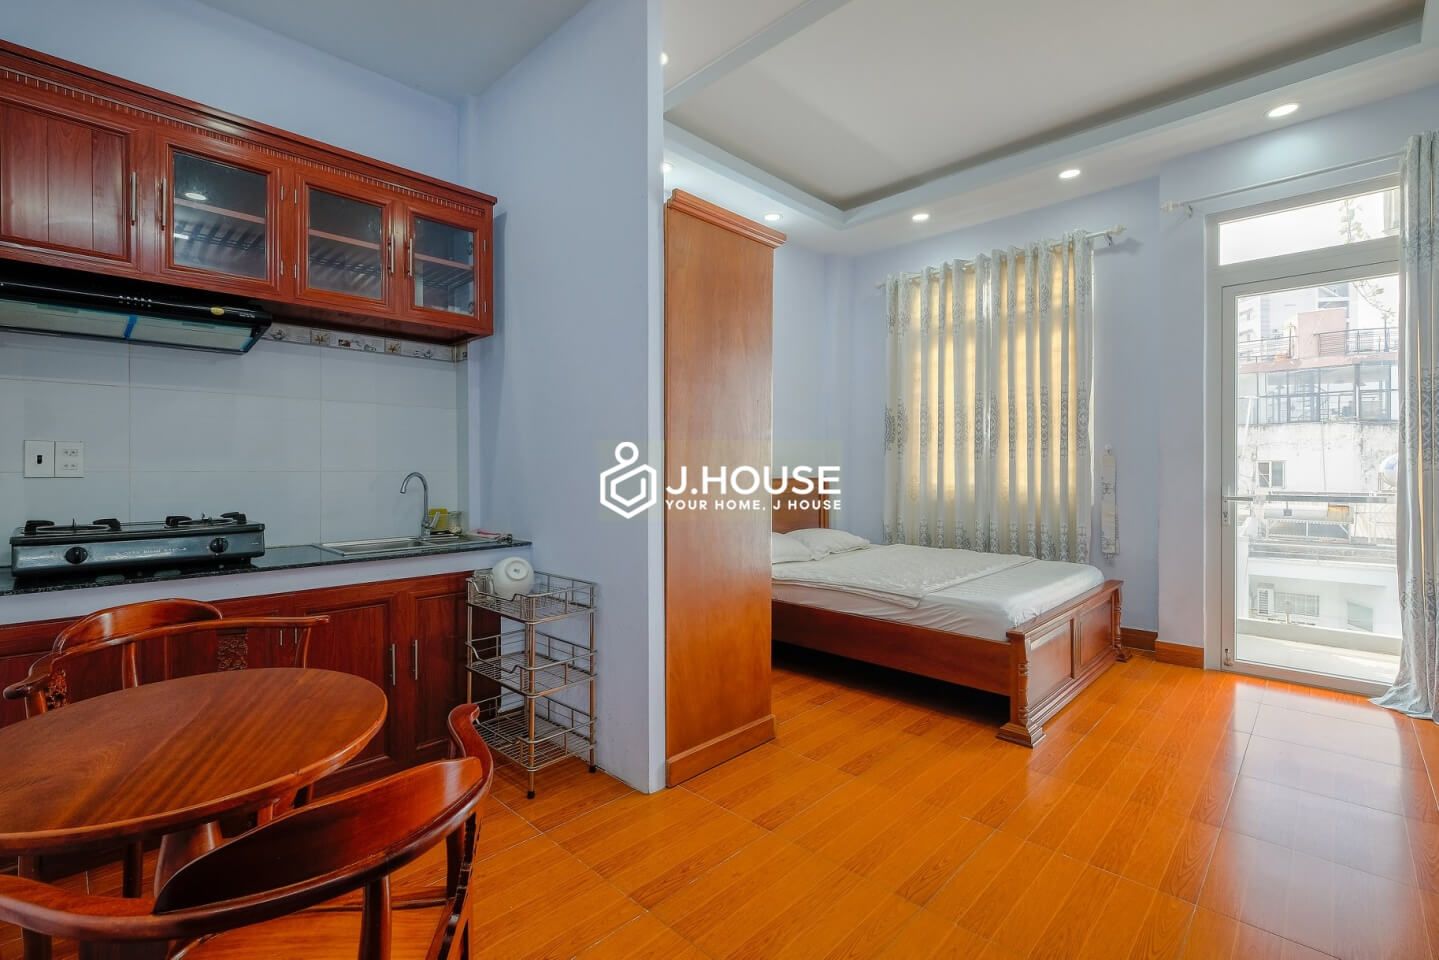 Fully furnished apartment on Dien Bien Phu street, Binh Thanh District, HCMC